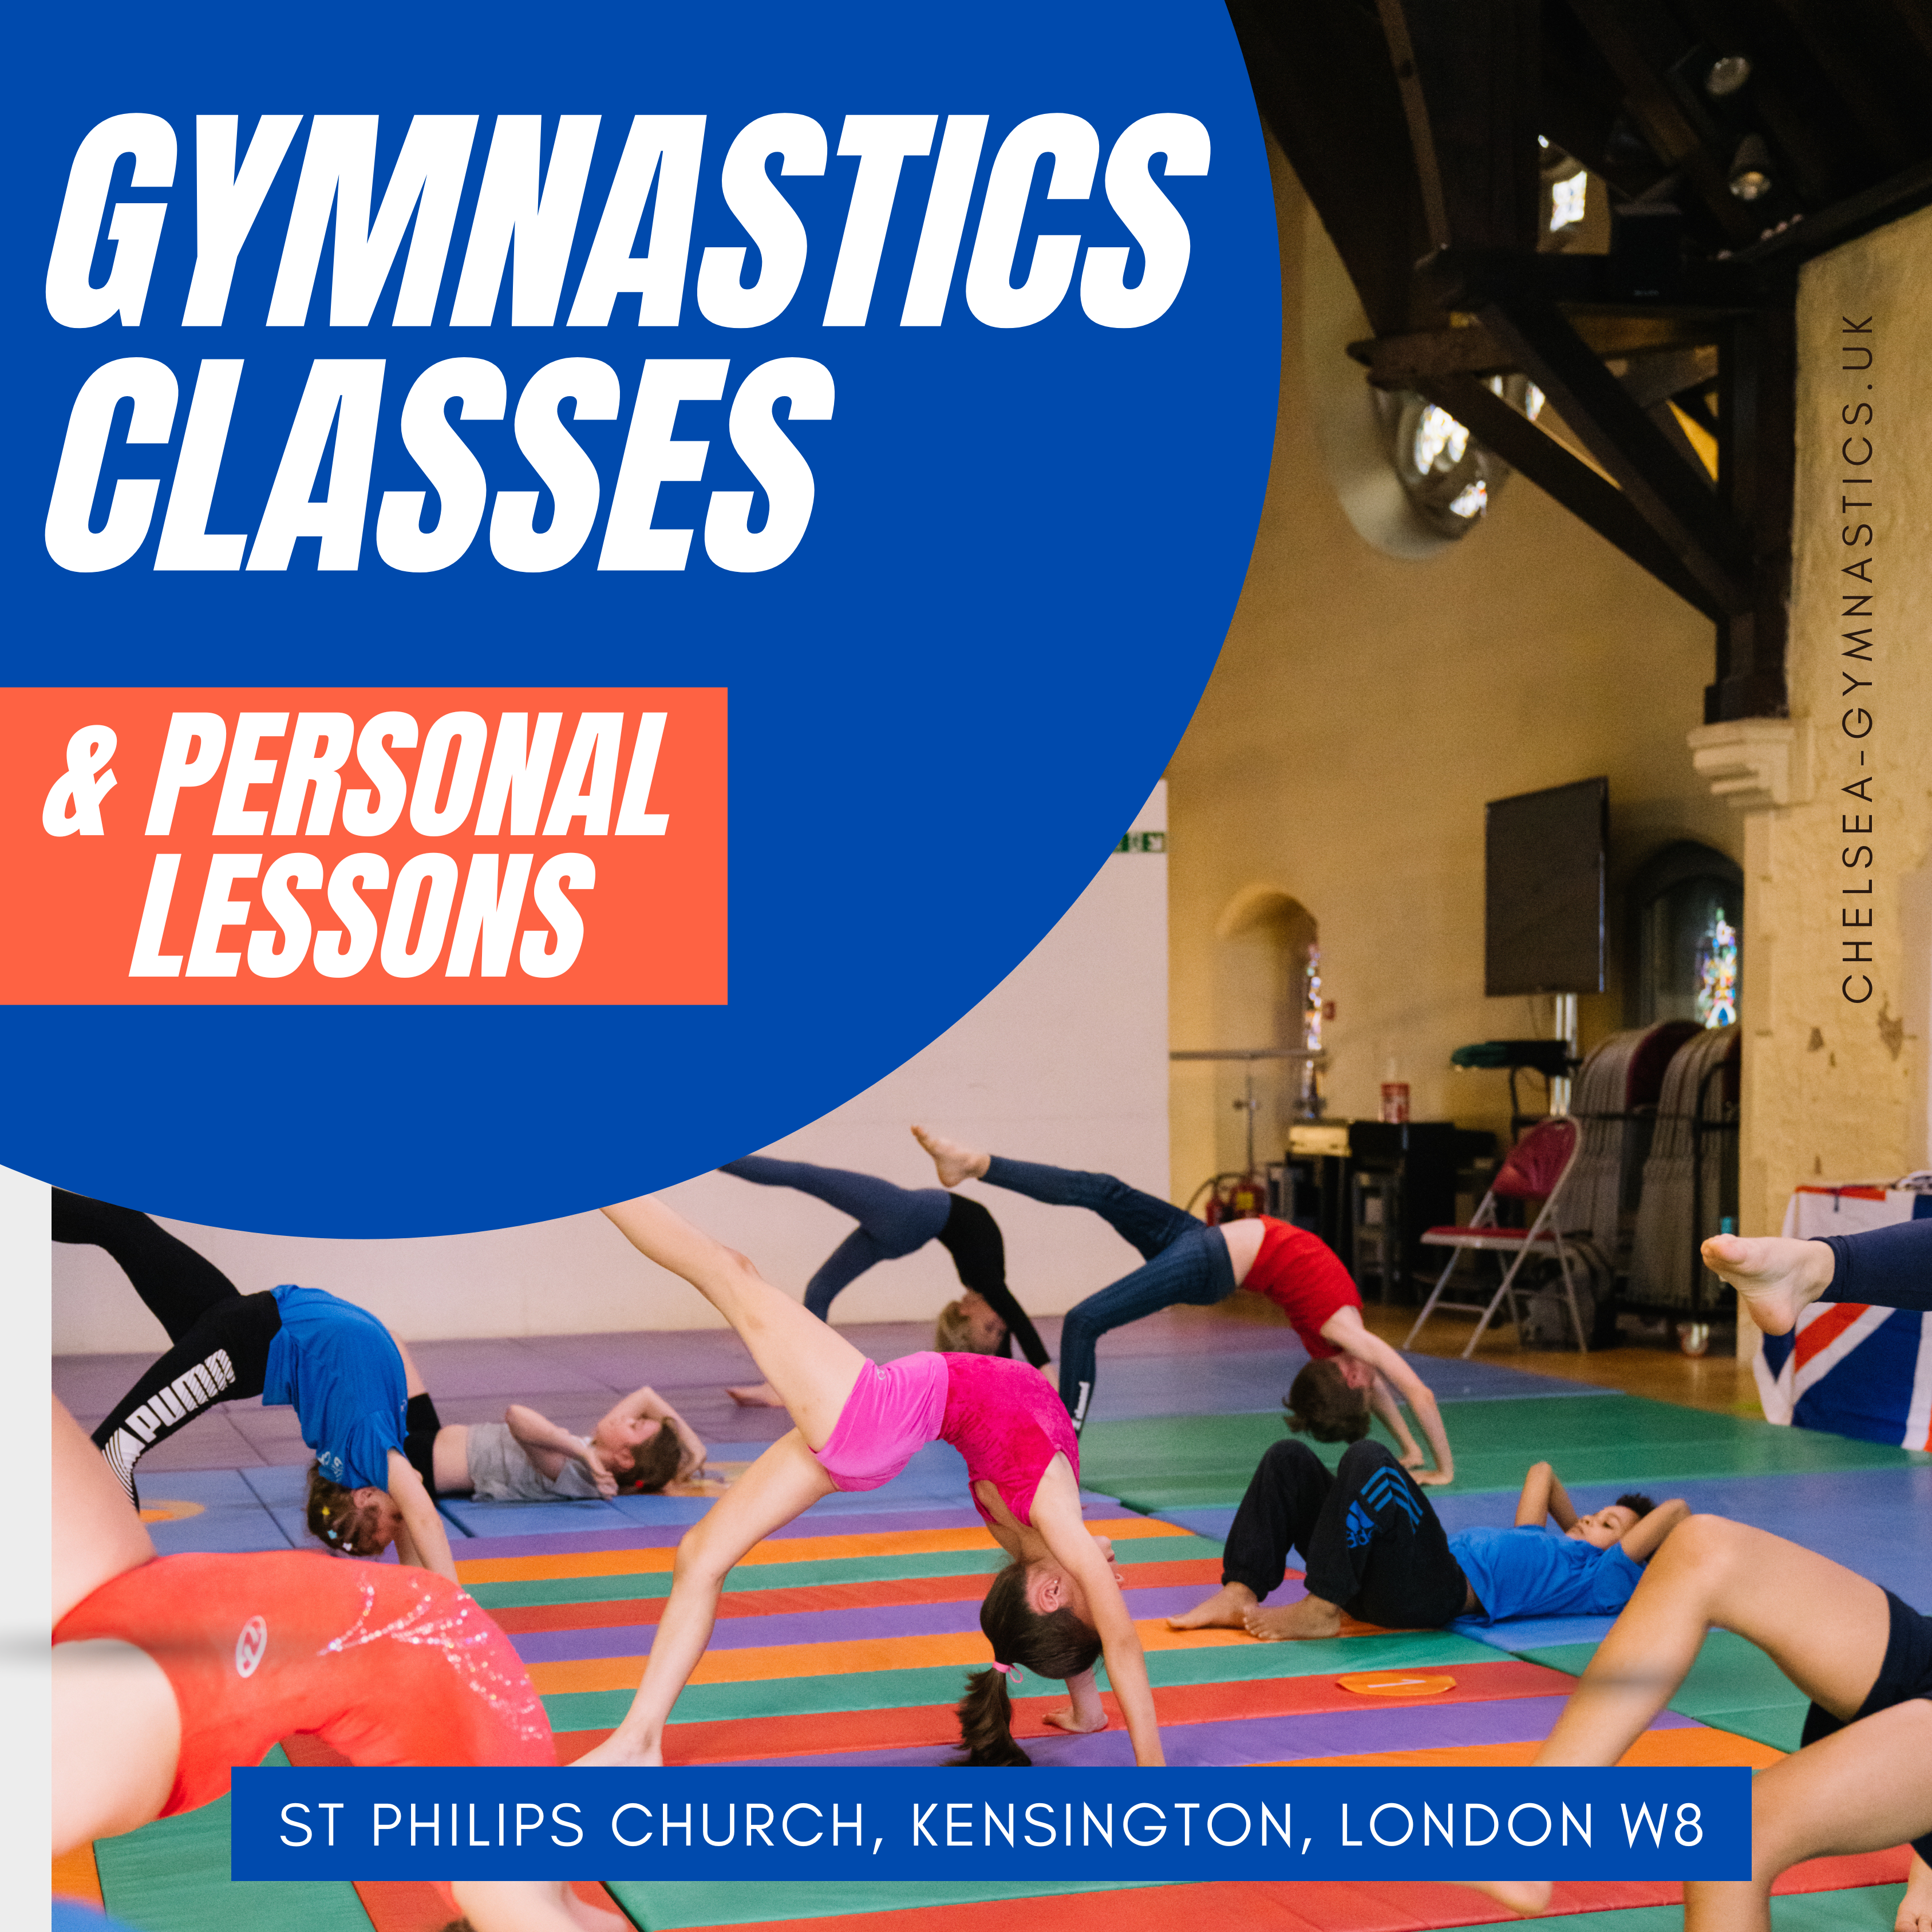 Group and Personal Gymnastics Classes For Children at St Philip's Church in Kensington W8